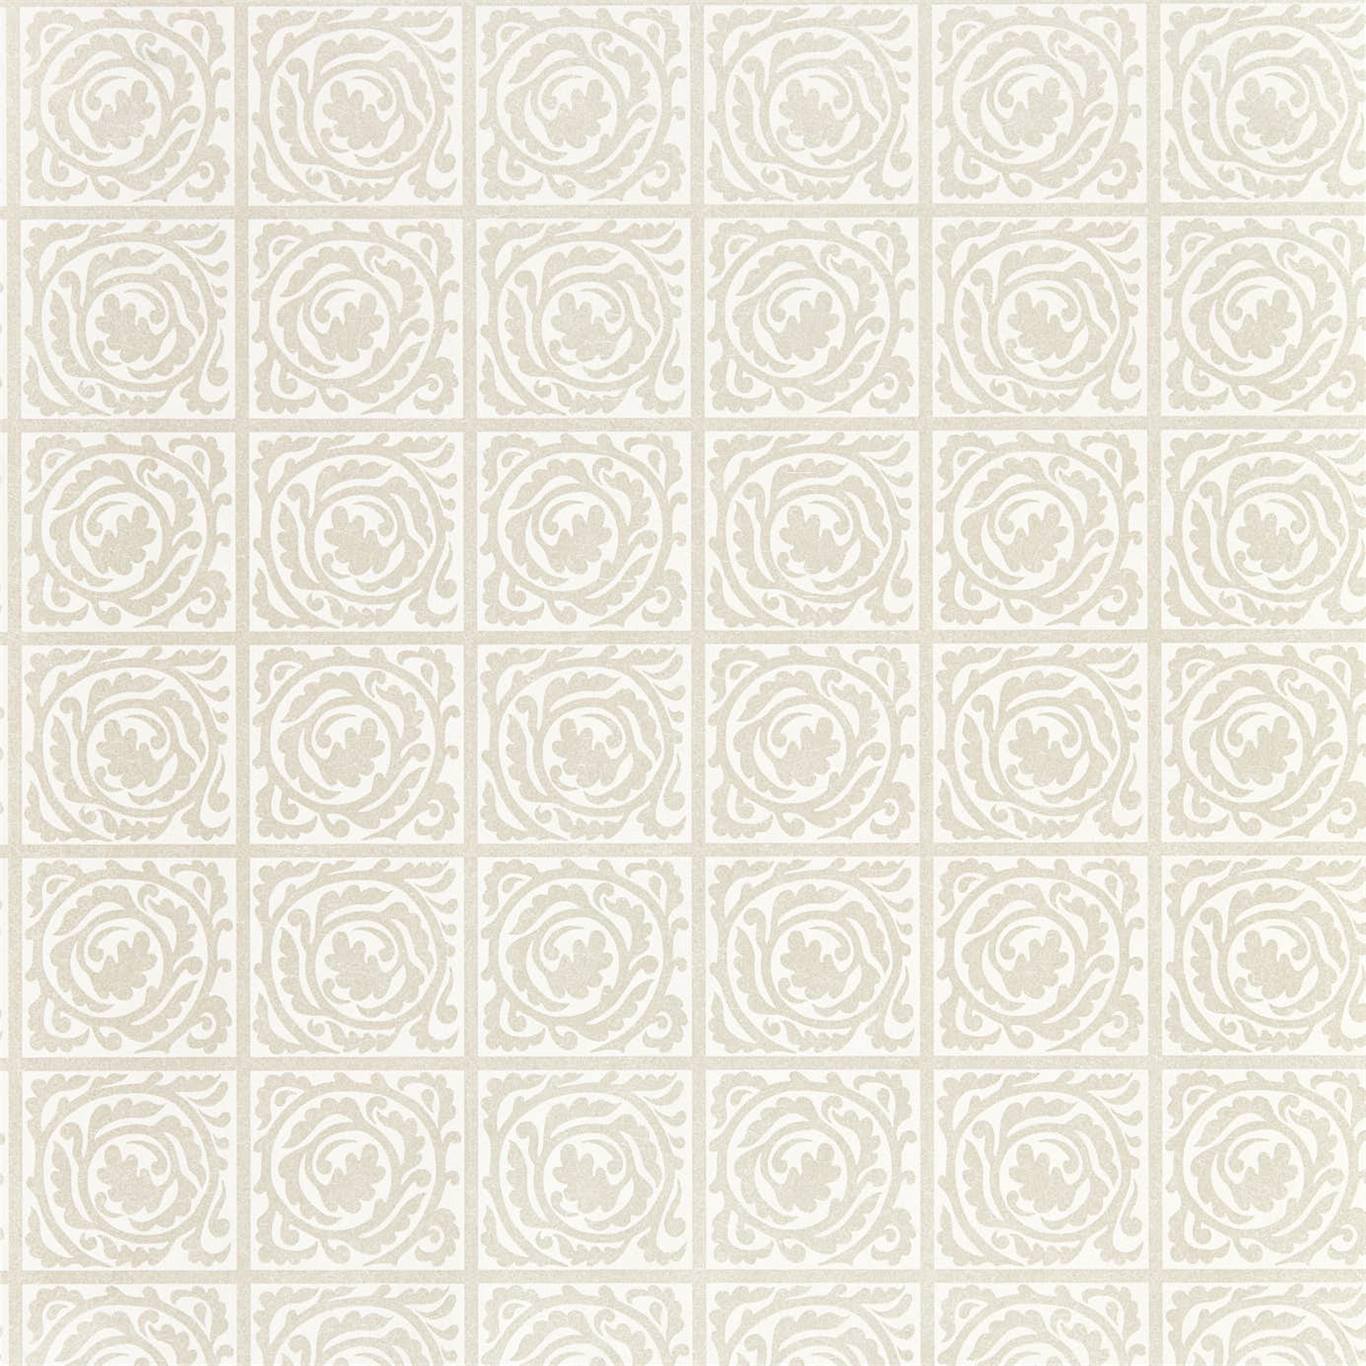 Pure Scroll White Clover Wallpaper DMPN216545 by Morris & Co